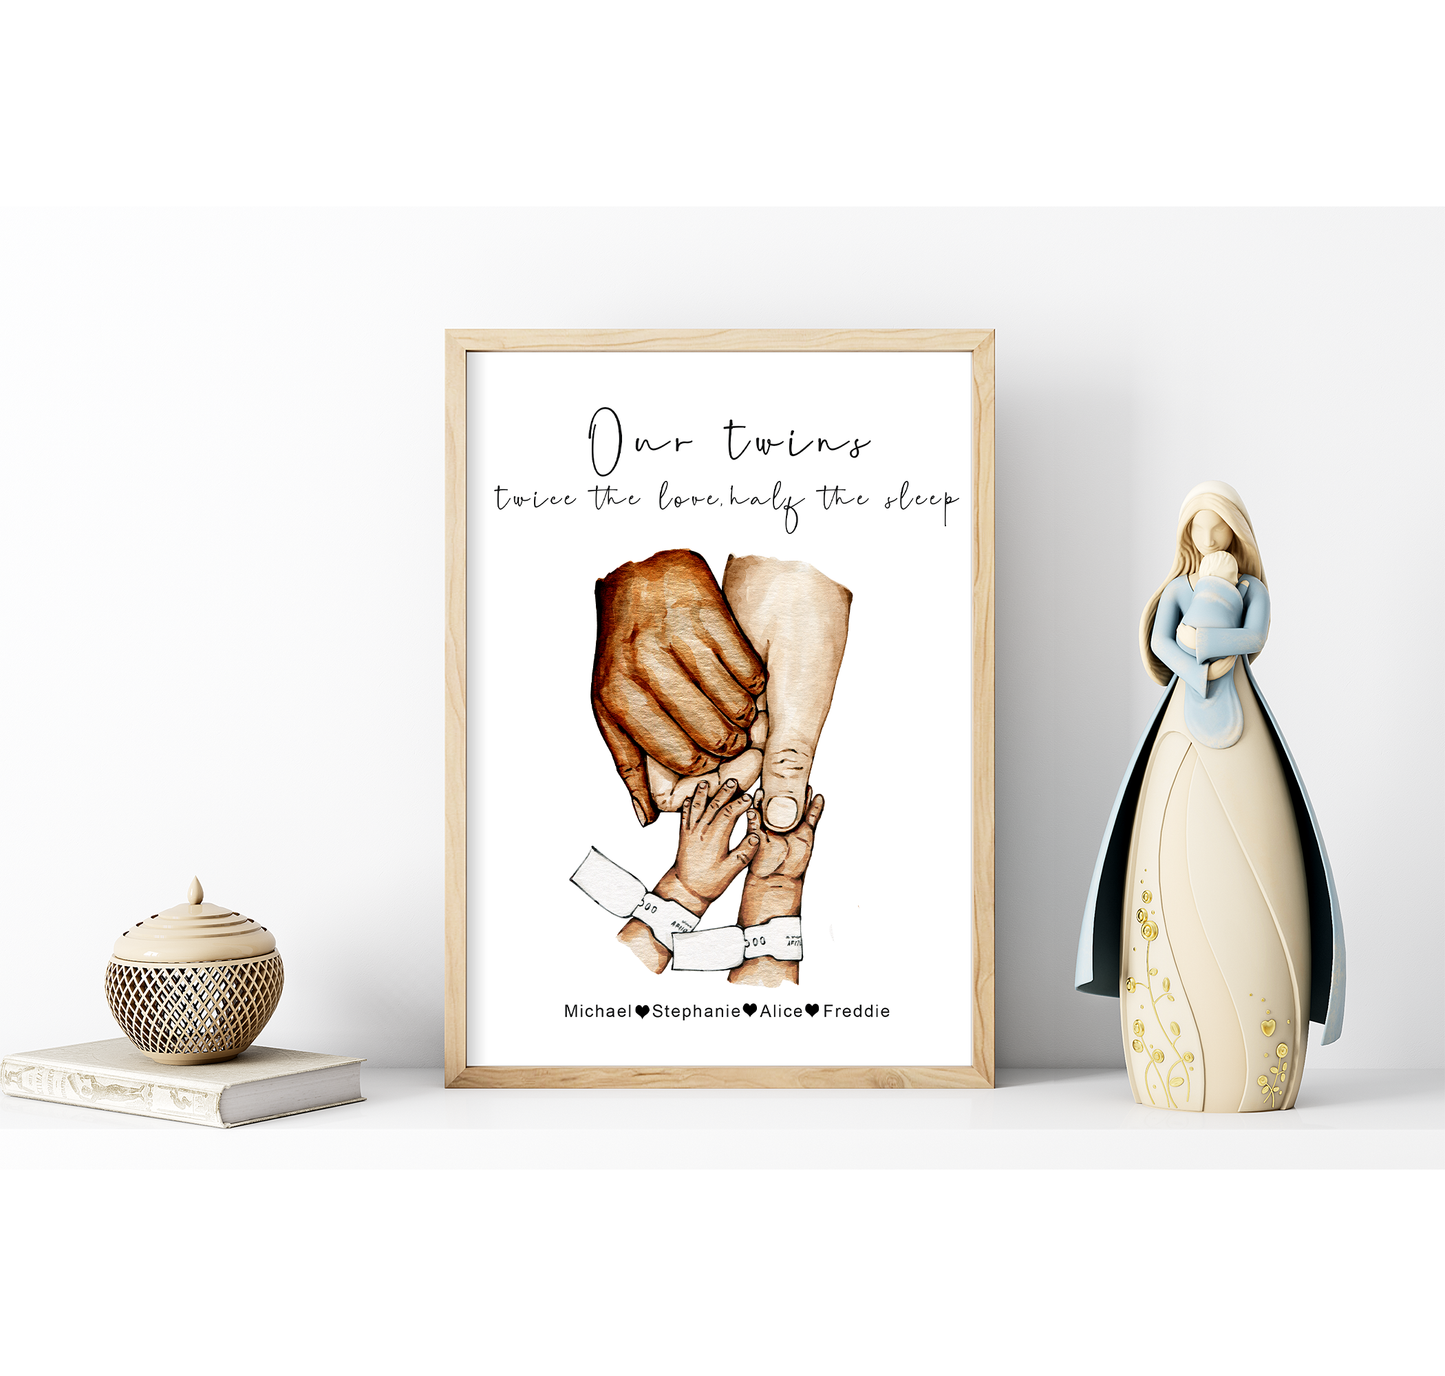 Parents with new baby, twins or triplets | Mummy and daddy with child's hand | Natural skin tones or Black and white | A3 | A4 | A5 |